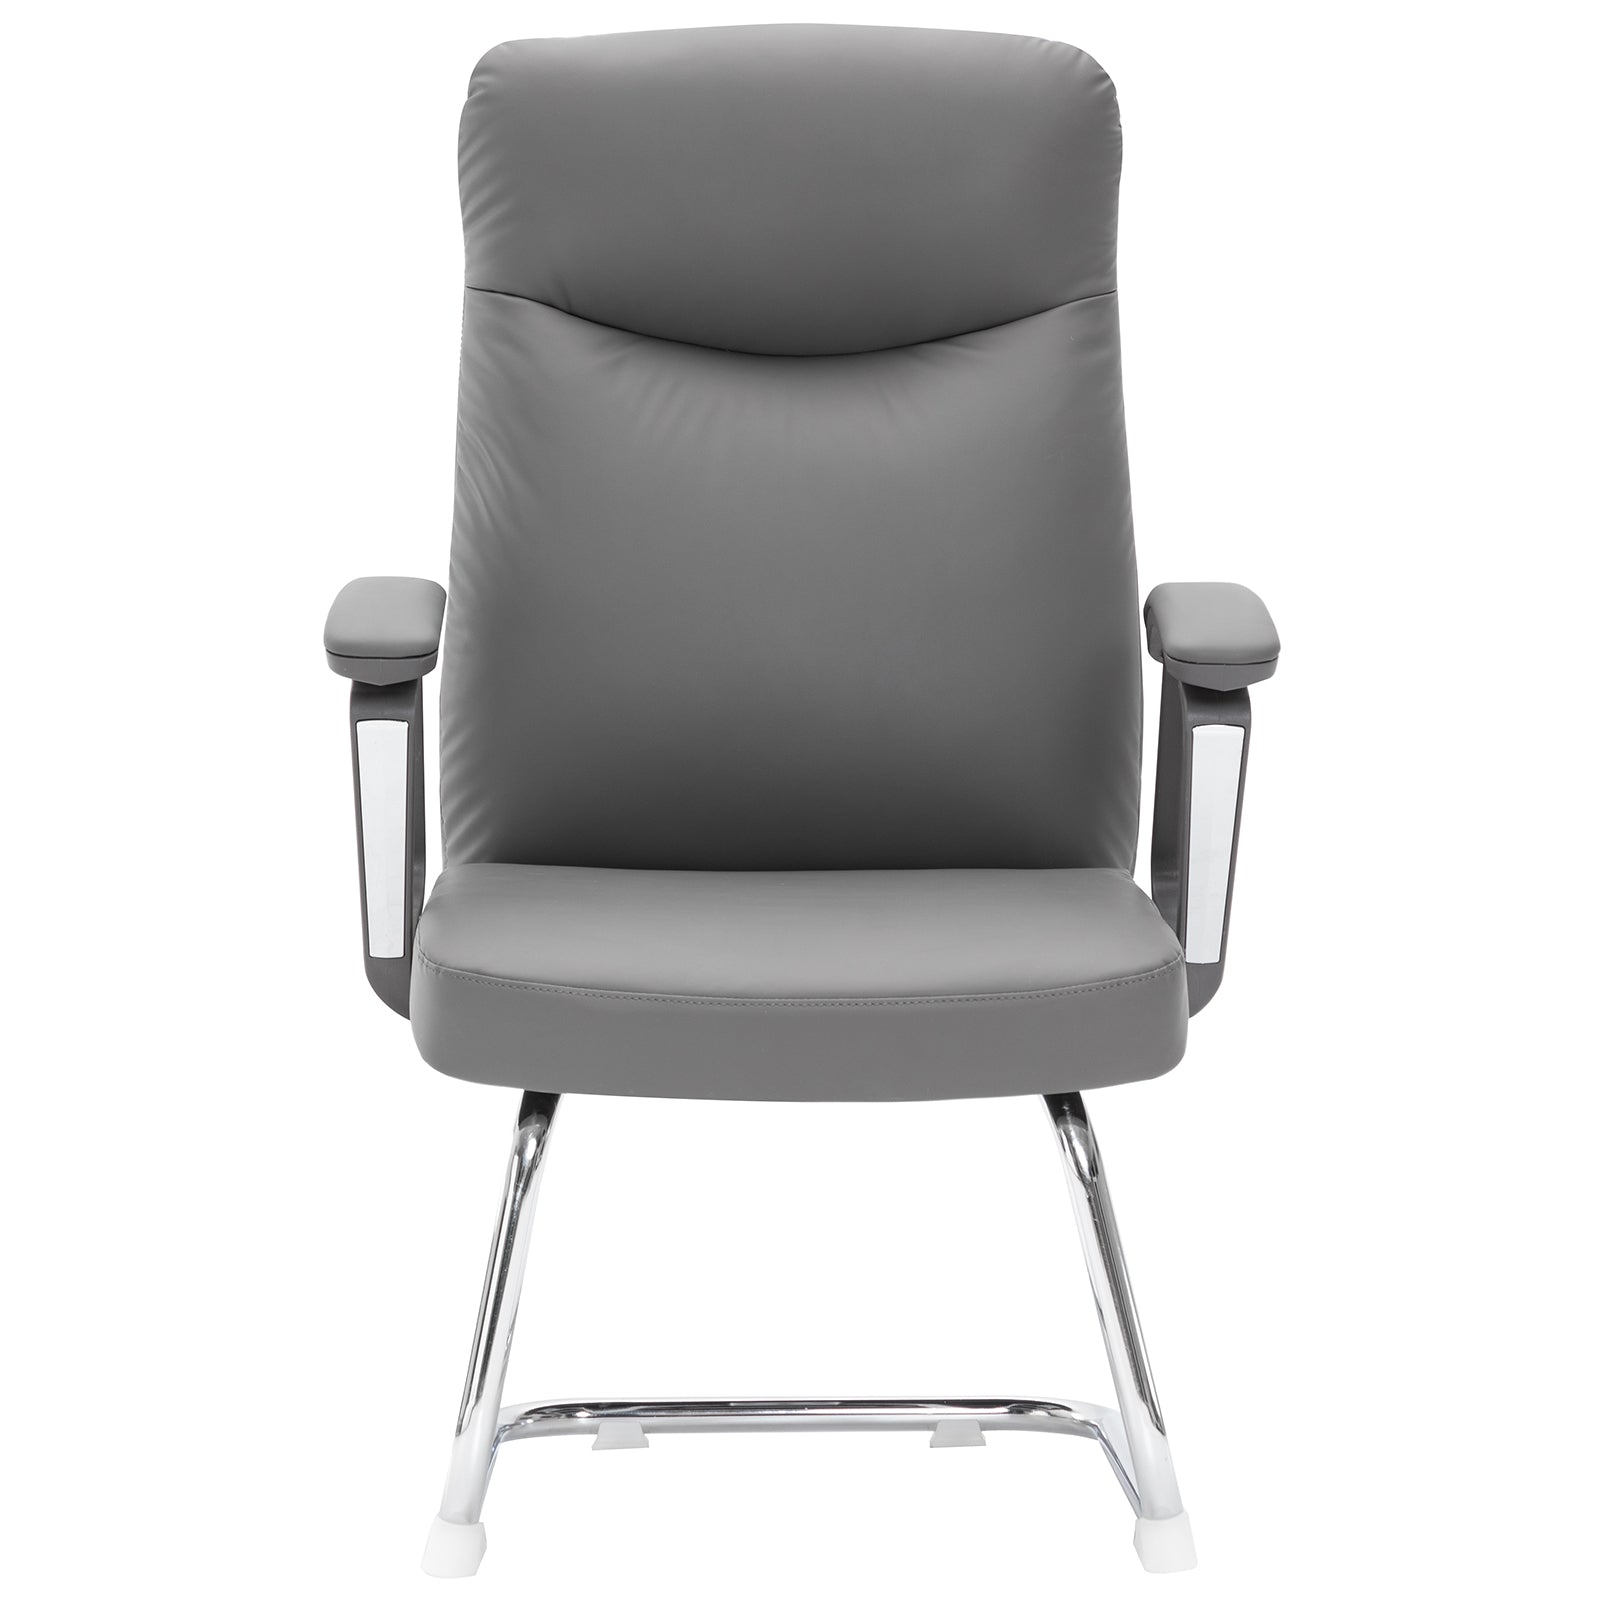 VOFFOV PU Leather Conference Chair